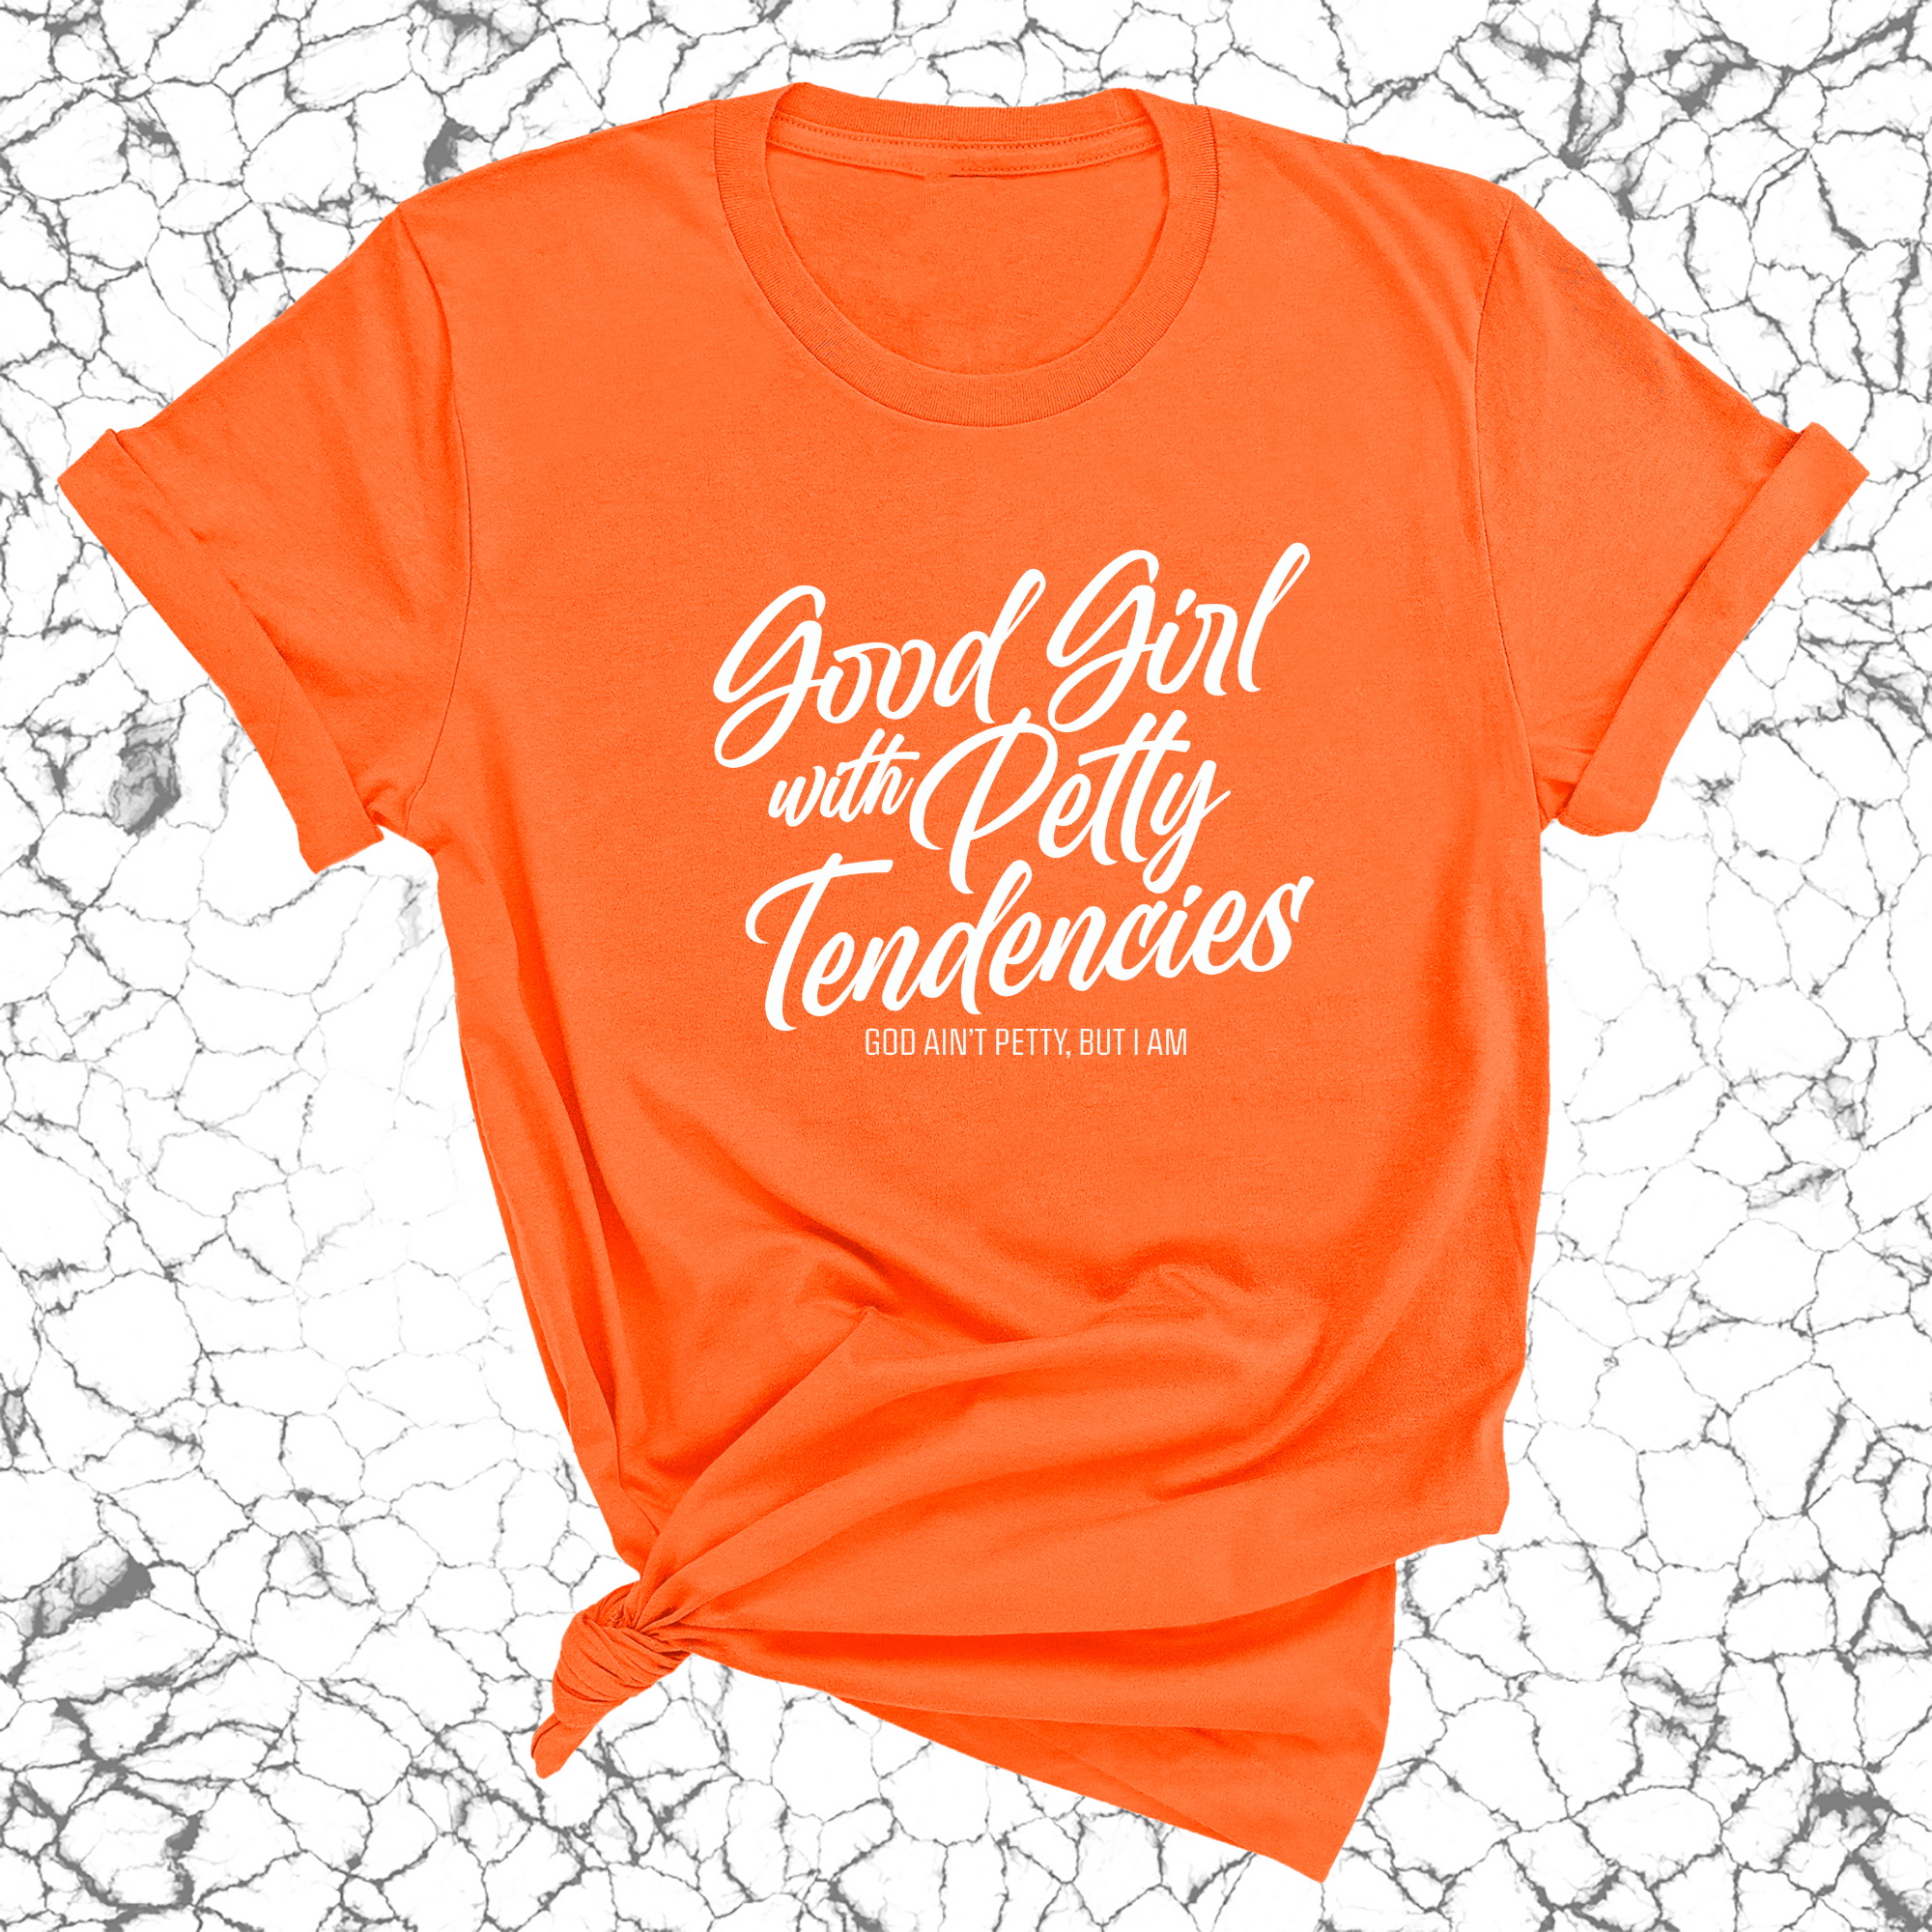 Good Girl with Petty Tendencies Unisex Tee-T-Shirt-The Original God Ain't Petty But I Am